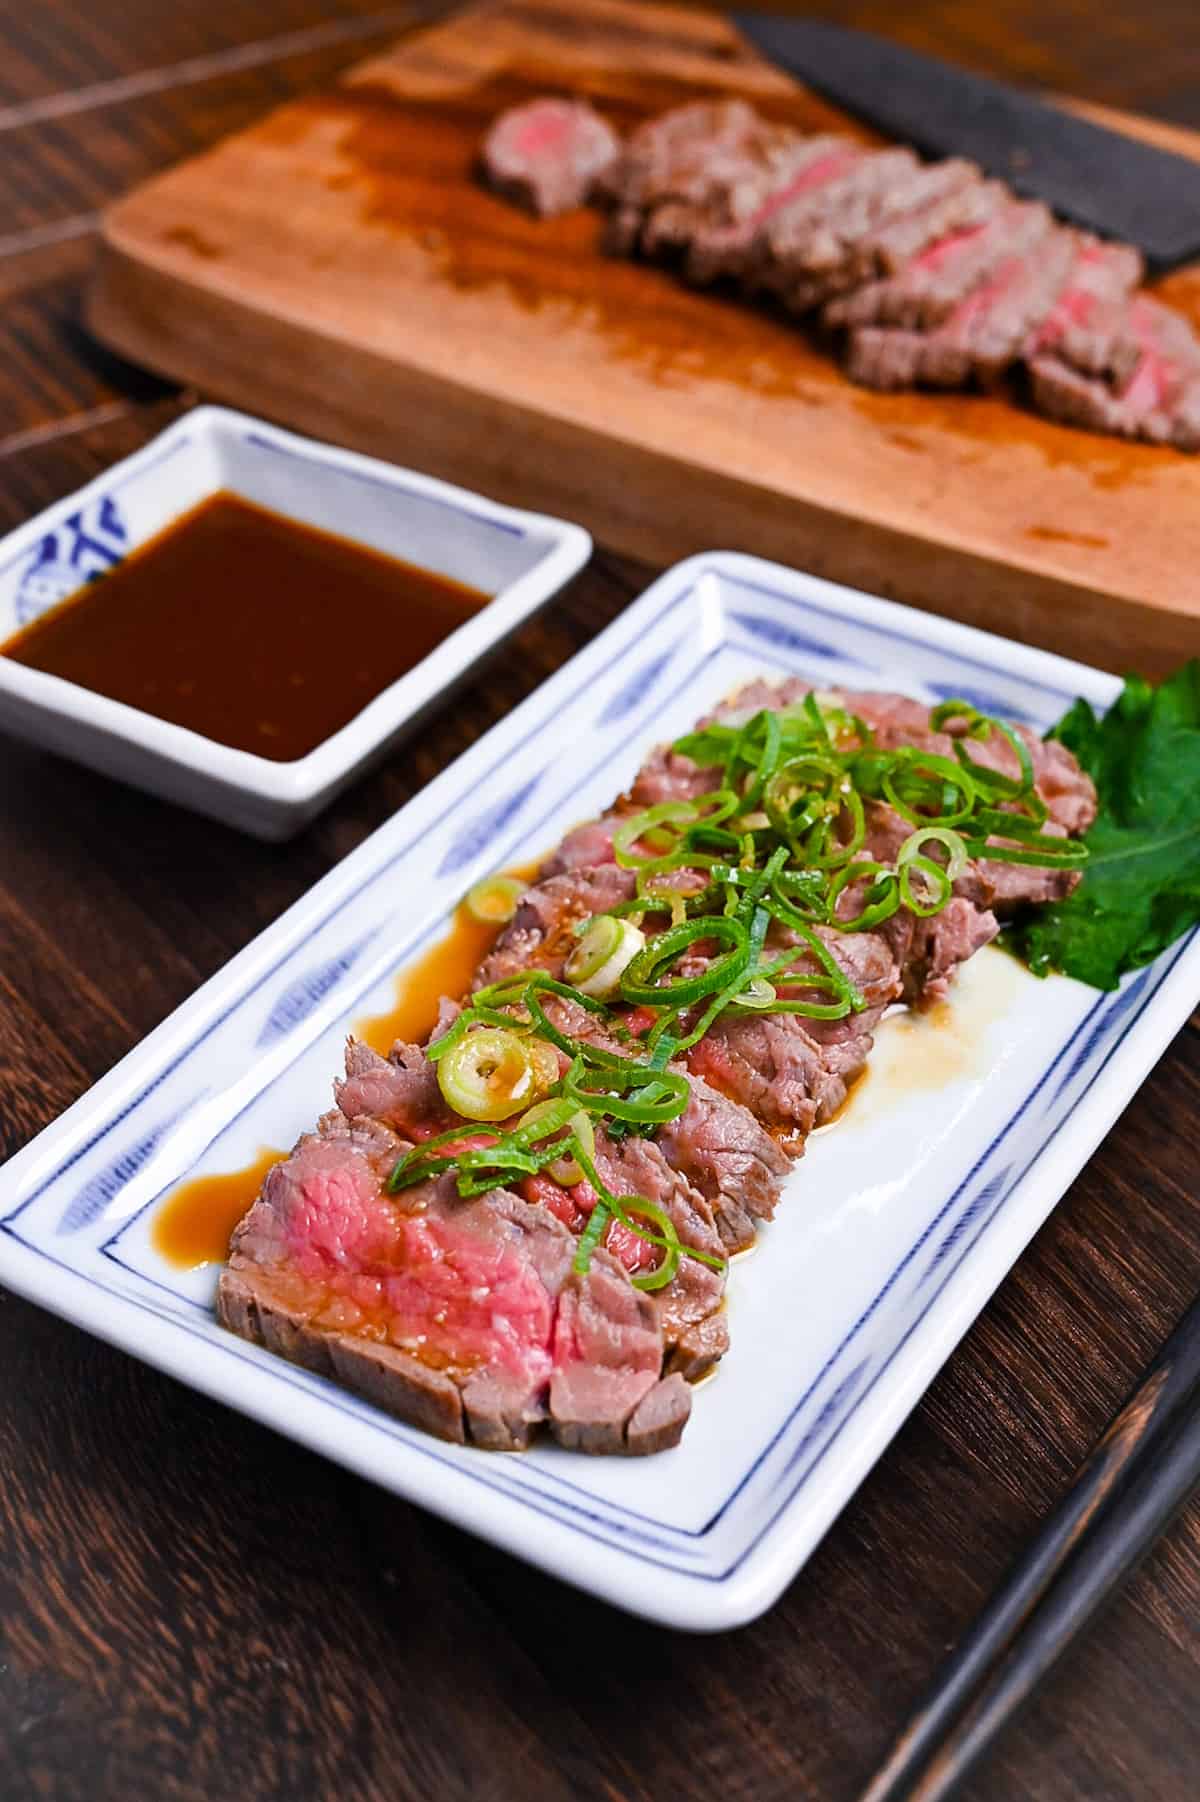 Beef tataki (Japanese seared beef fillet) on a white plate topped with homemade sauce and chopped green onions